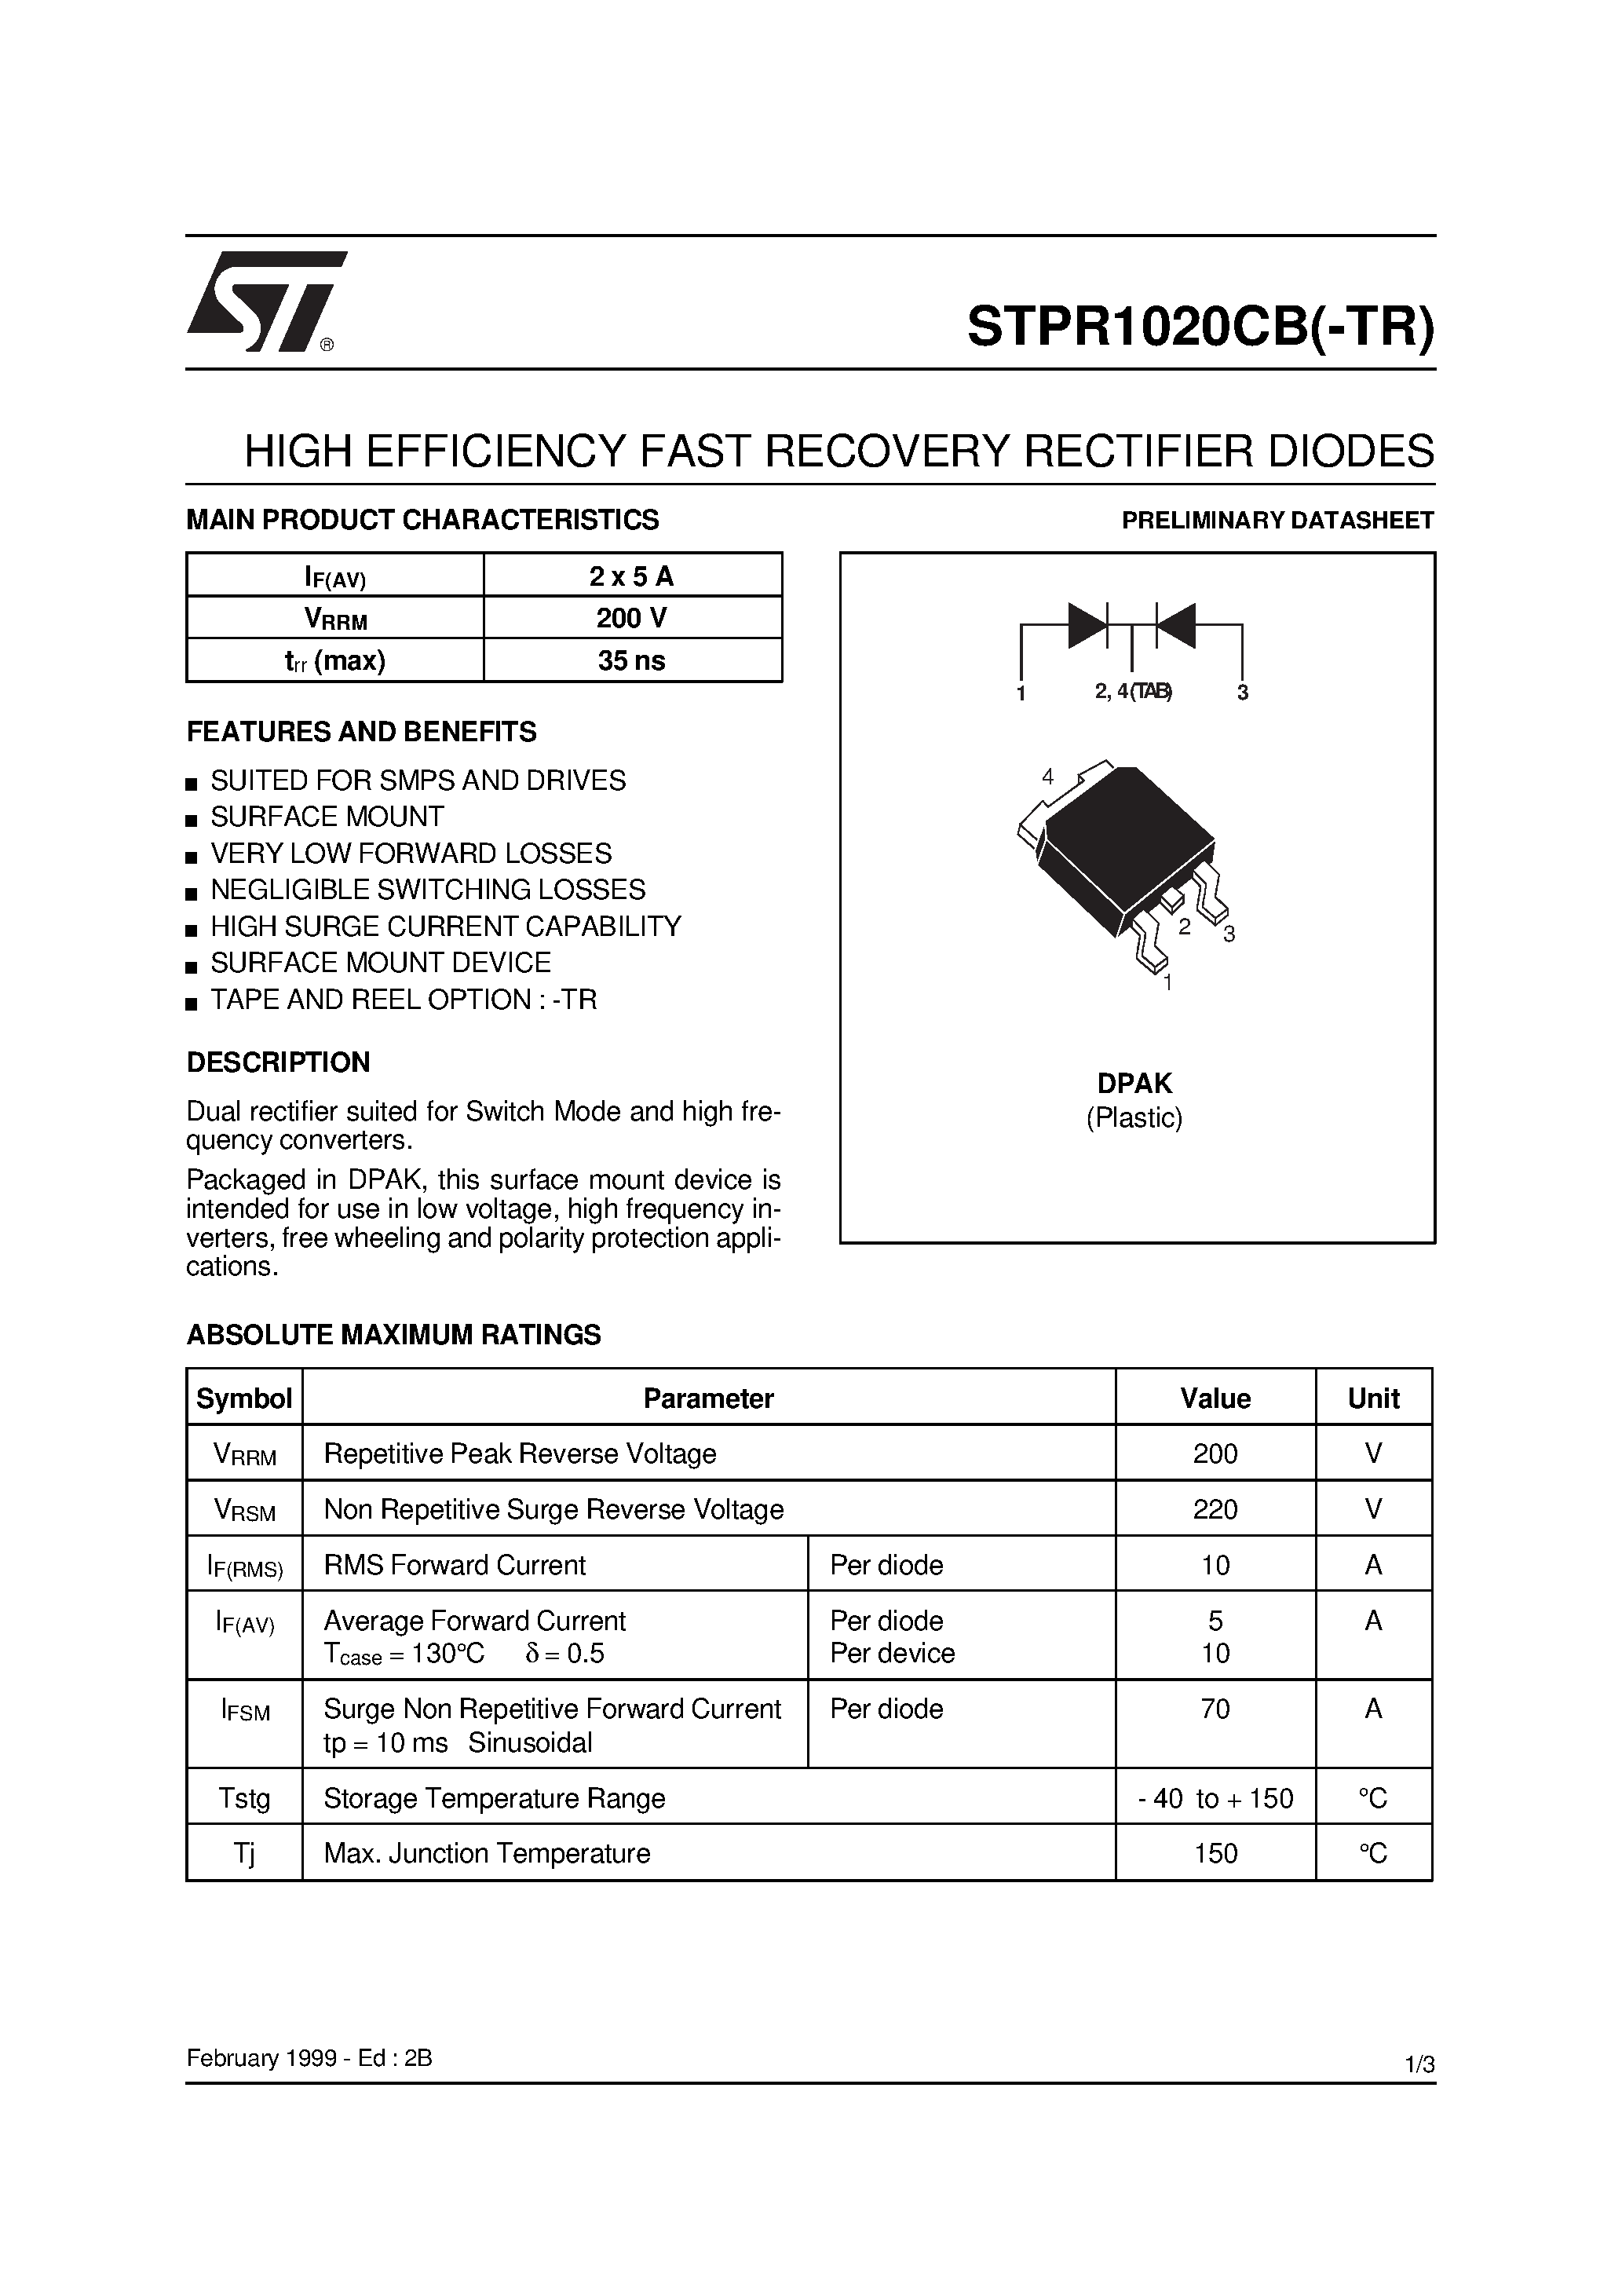 Даташит STPR1020CB-TR - HIGH EFFICIENCY FAST RECOVERY RECTIFIER DIODES страница 1